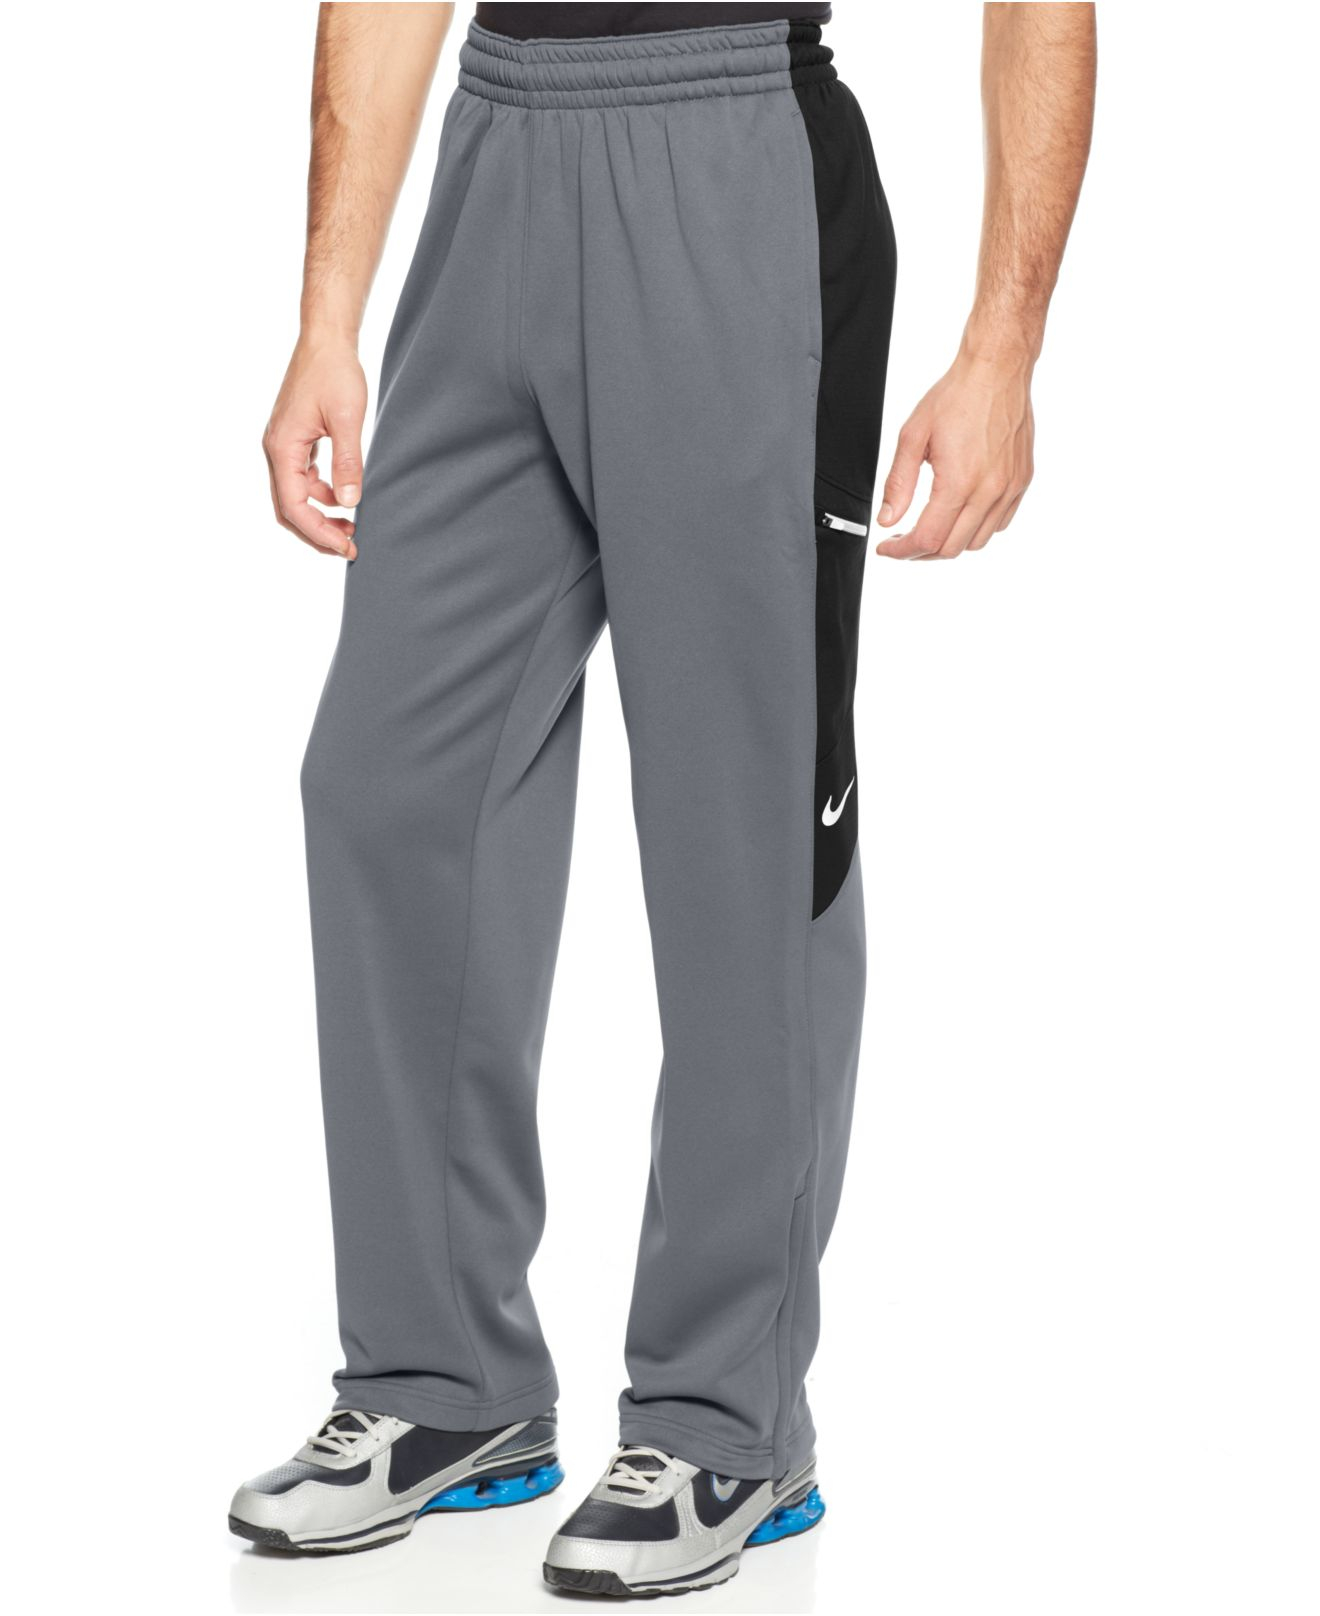 Lyst - Nike Elite World Tour Therma-Fit Pants in Gray for Men